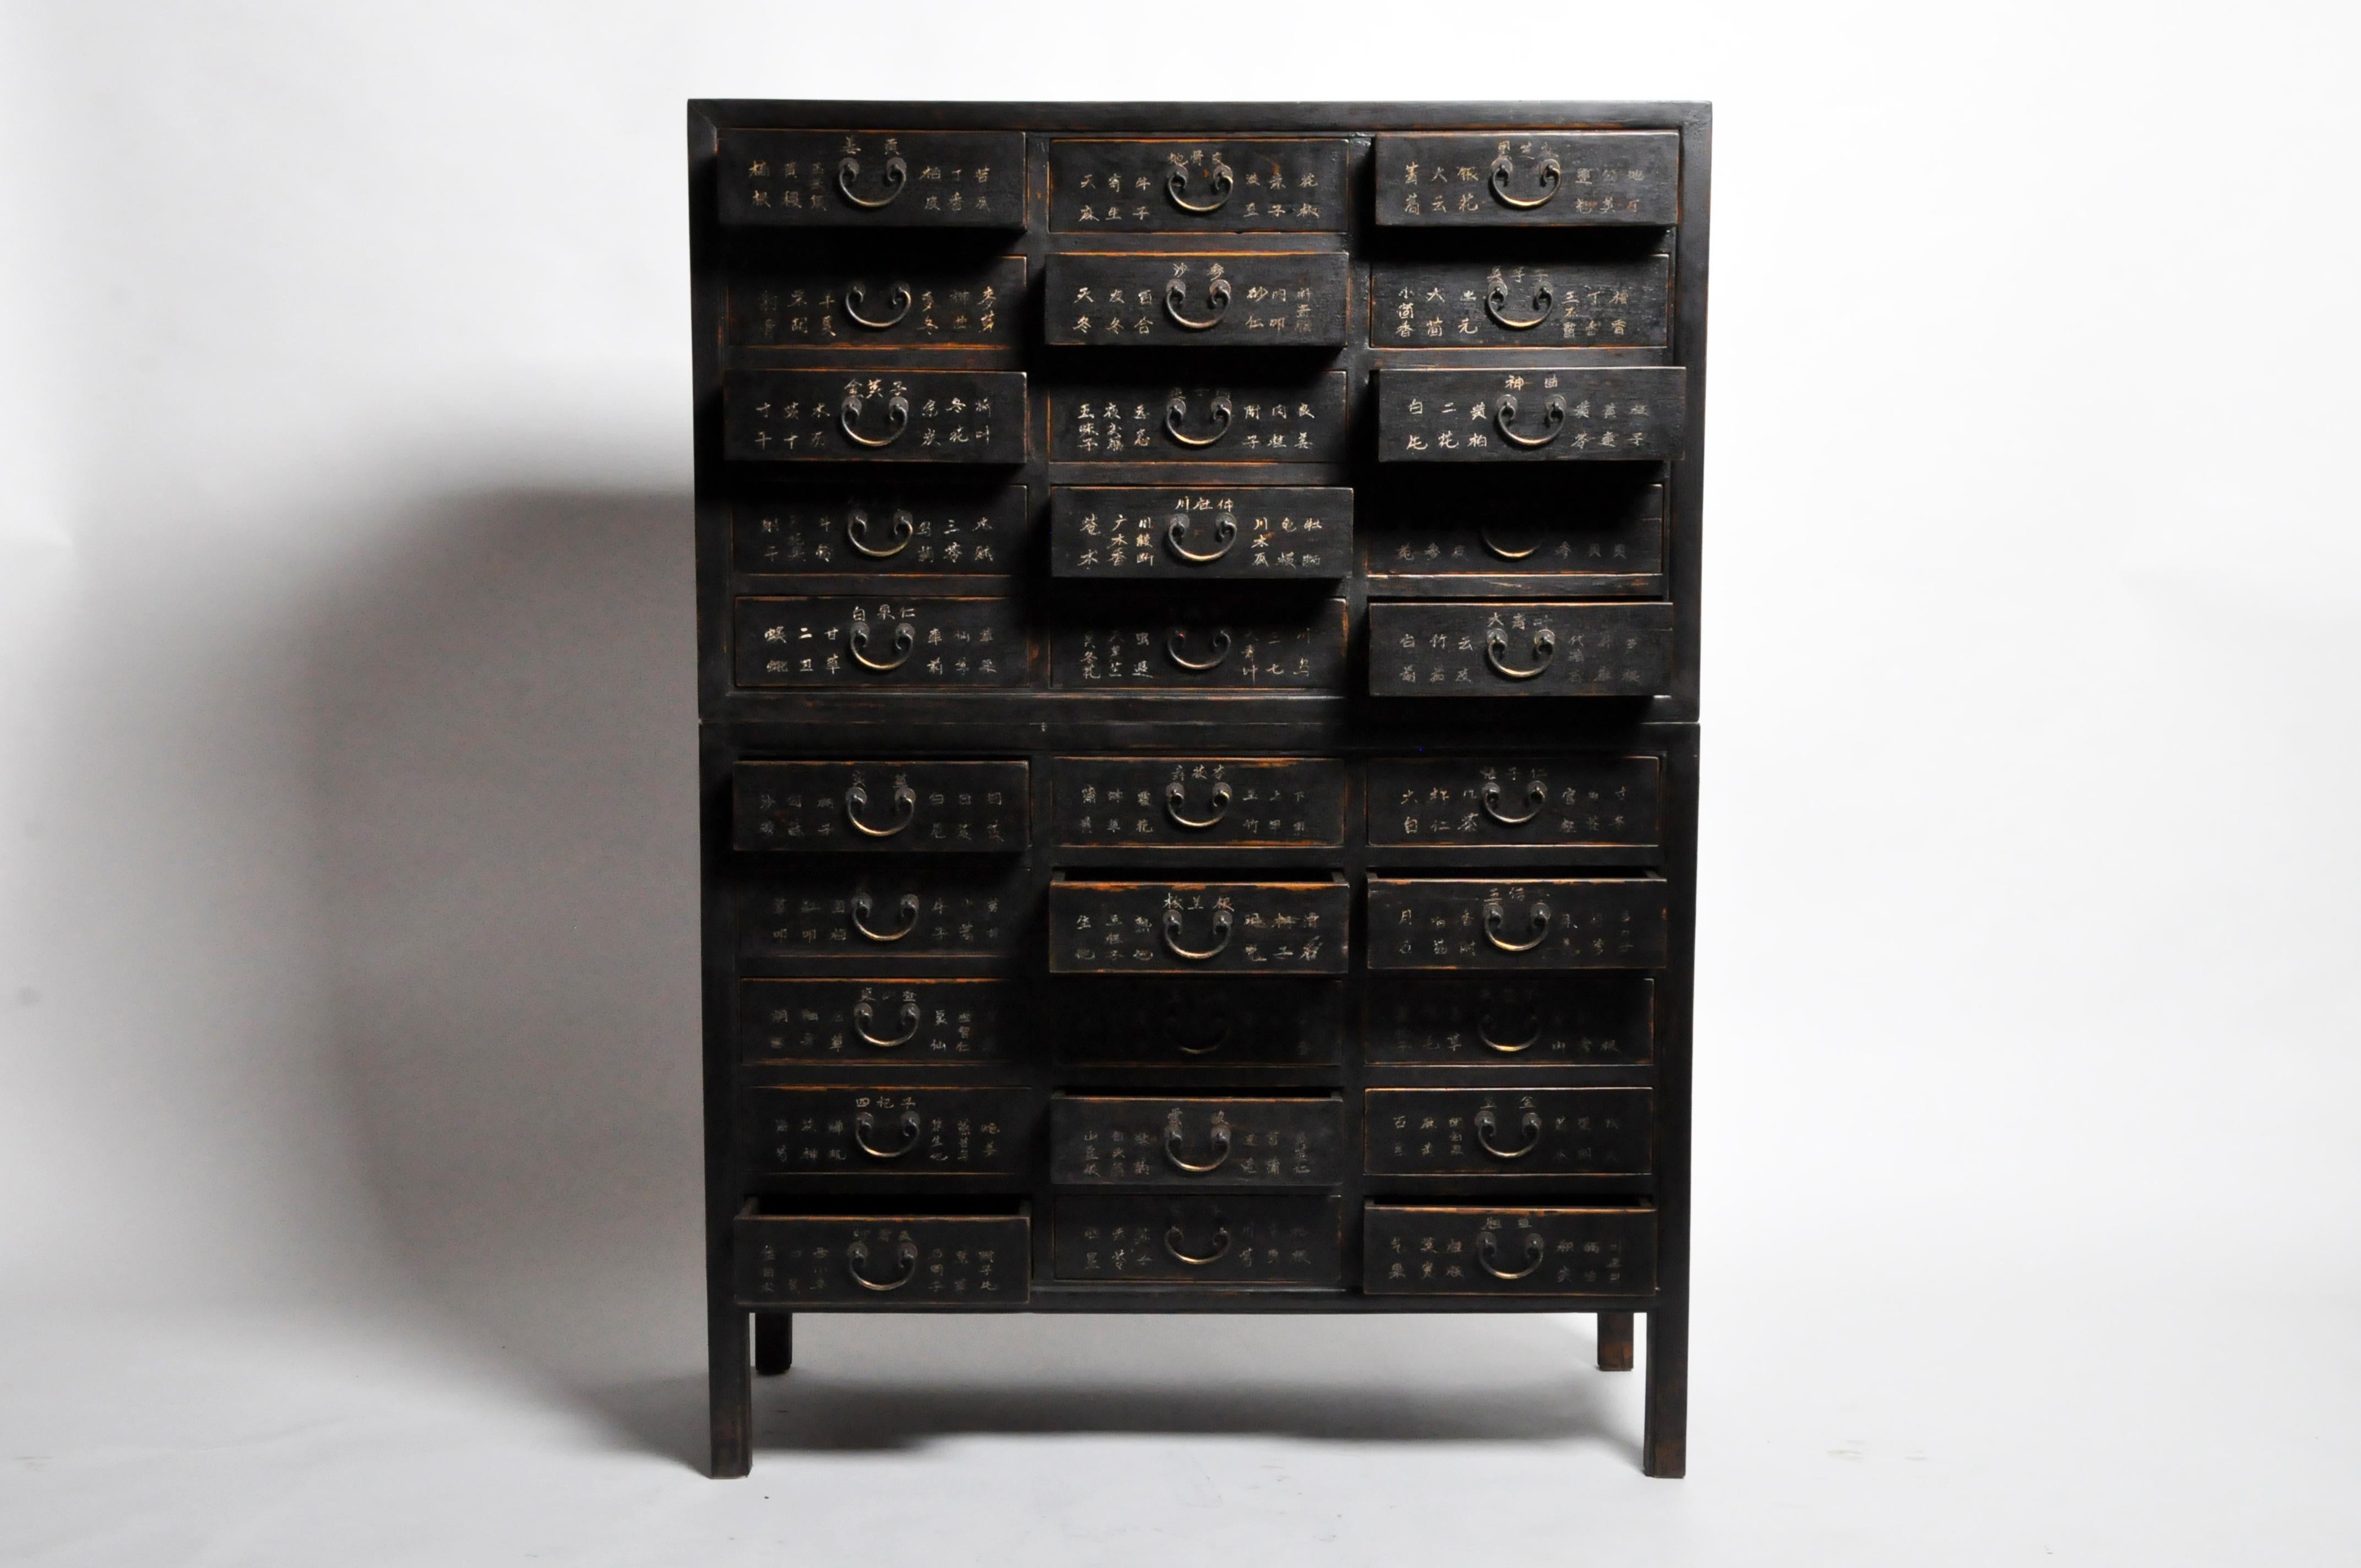 Chinese doctors used chests like this to store medicinal herbs, extracts, and powdered minerals. Sometimes multiple chests were arranged in banks to offer the herbalist the greatest selection of ingredients for a medicinal cure or balm. The